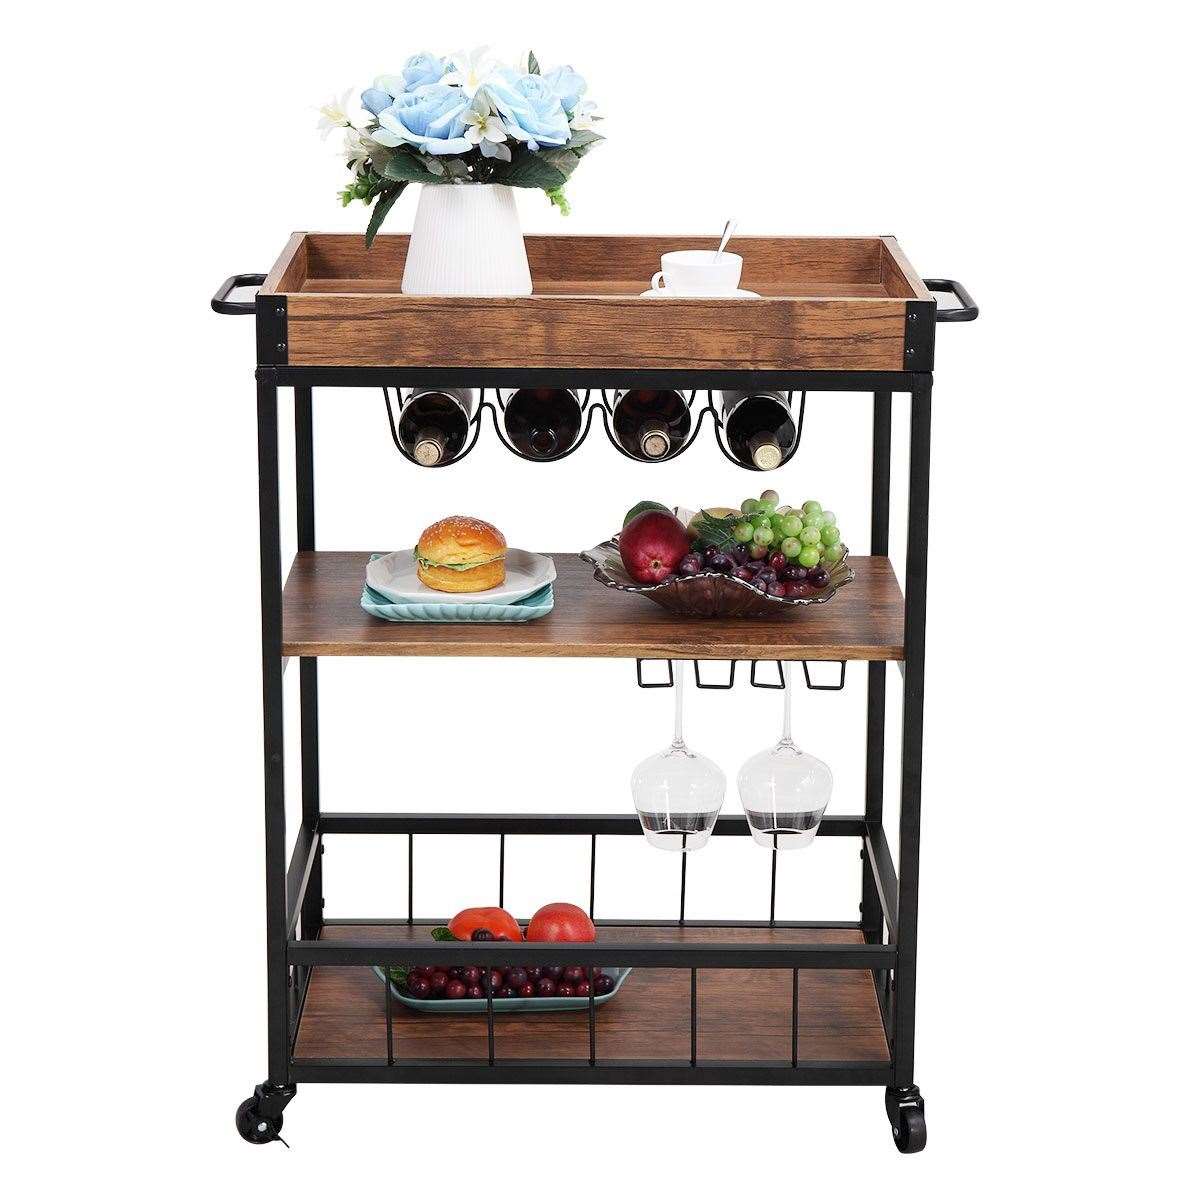 3-Tier Industrial Bar Serving Cart, Mobile Kitchen Storage Cart with Casters and Removable Tray, Wood Metal Serving Trolley for Home Dining Room, Brown and Black XH